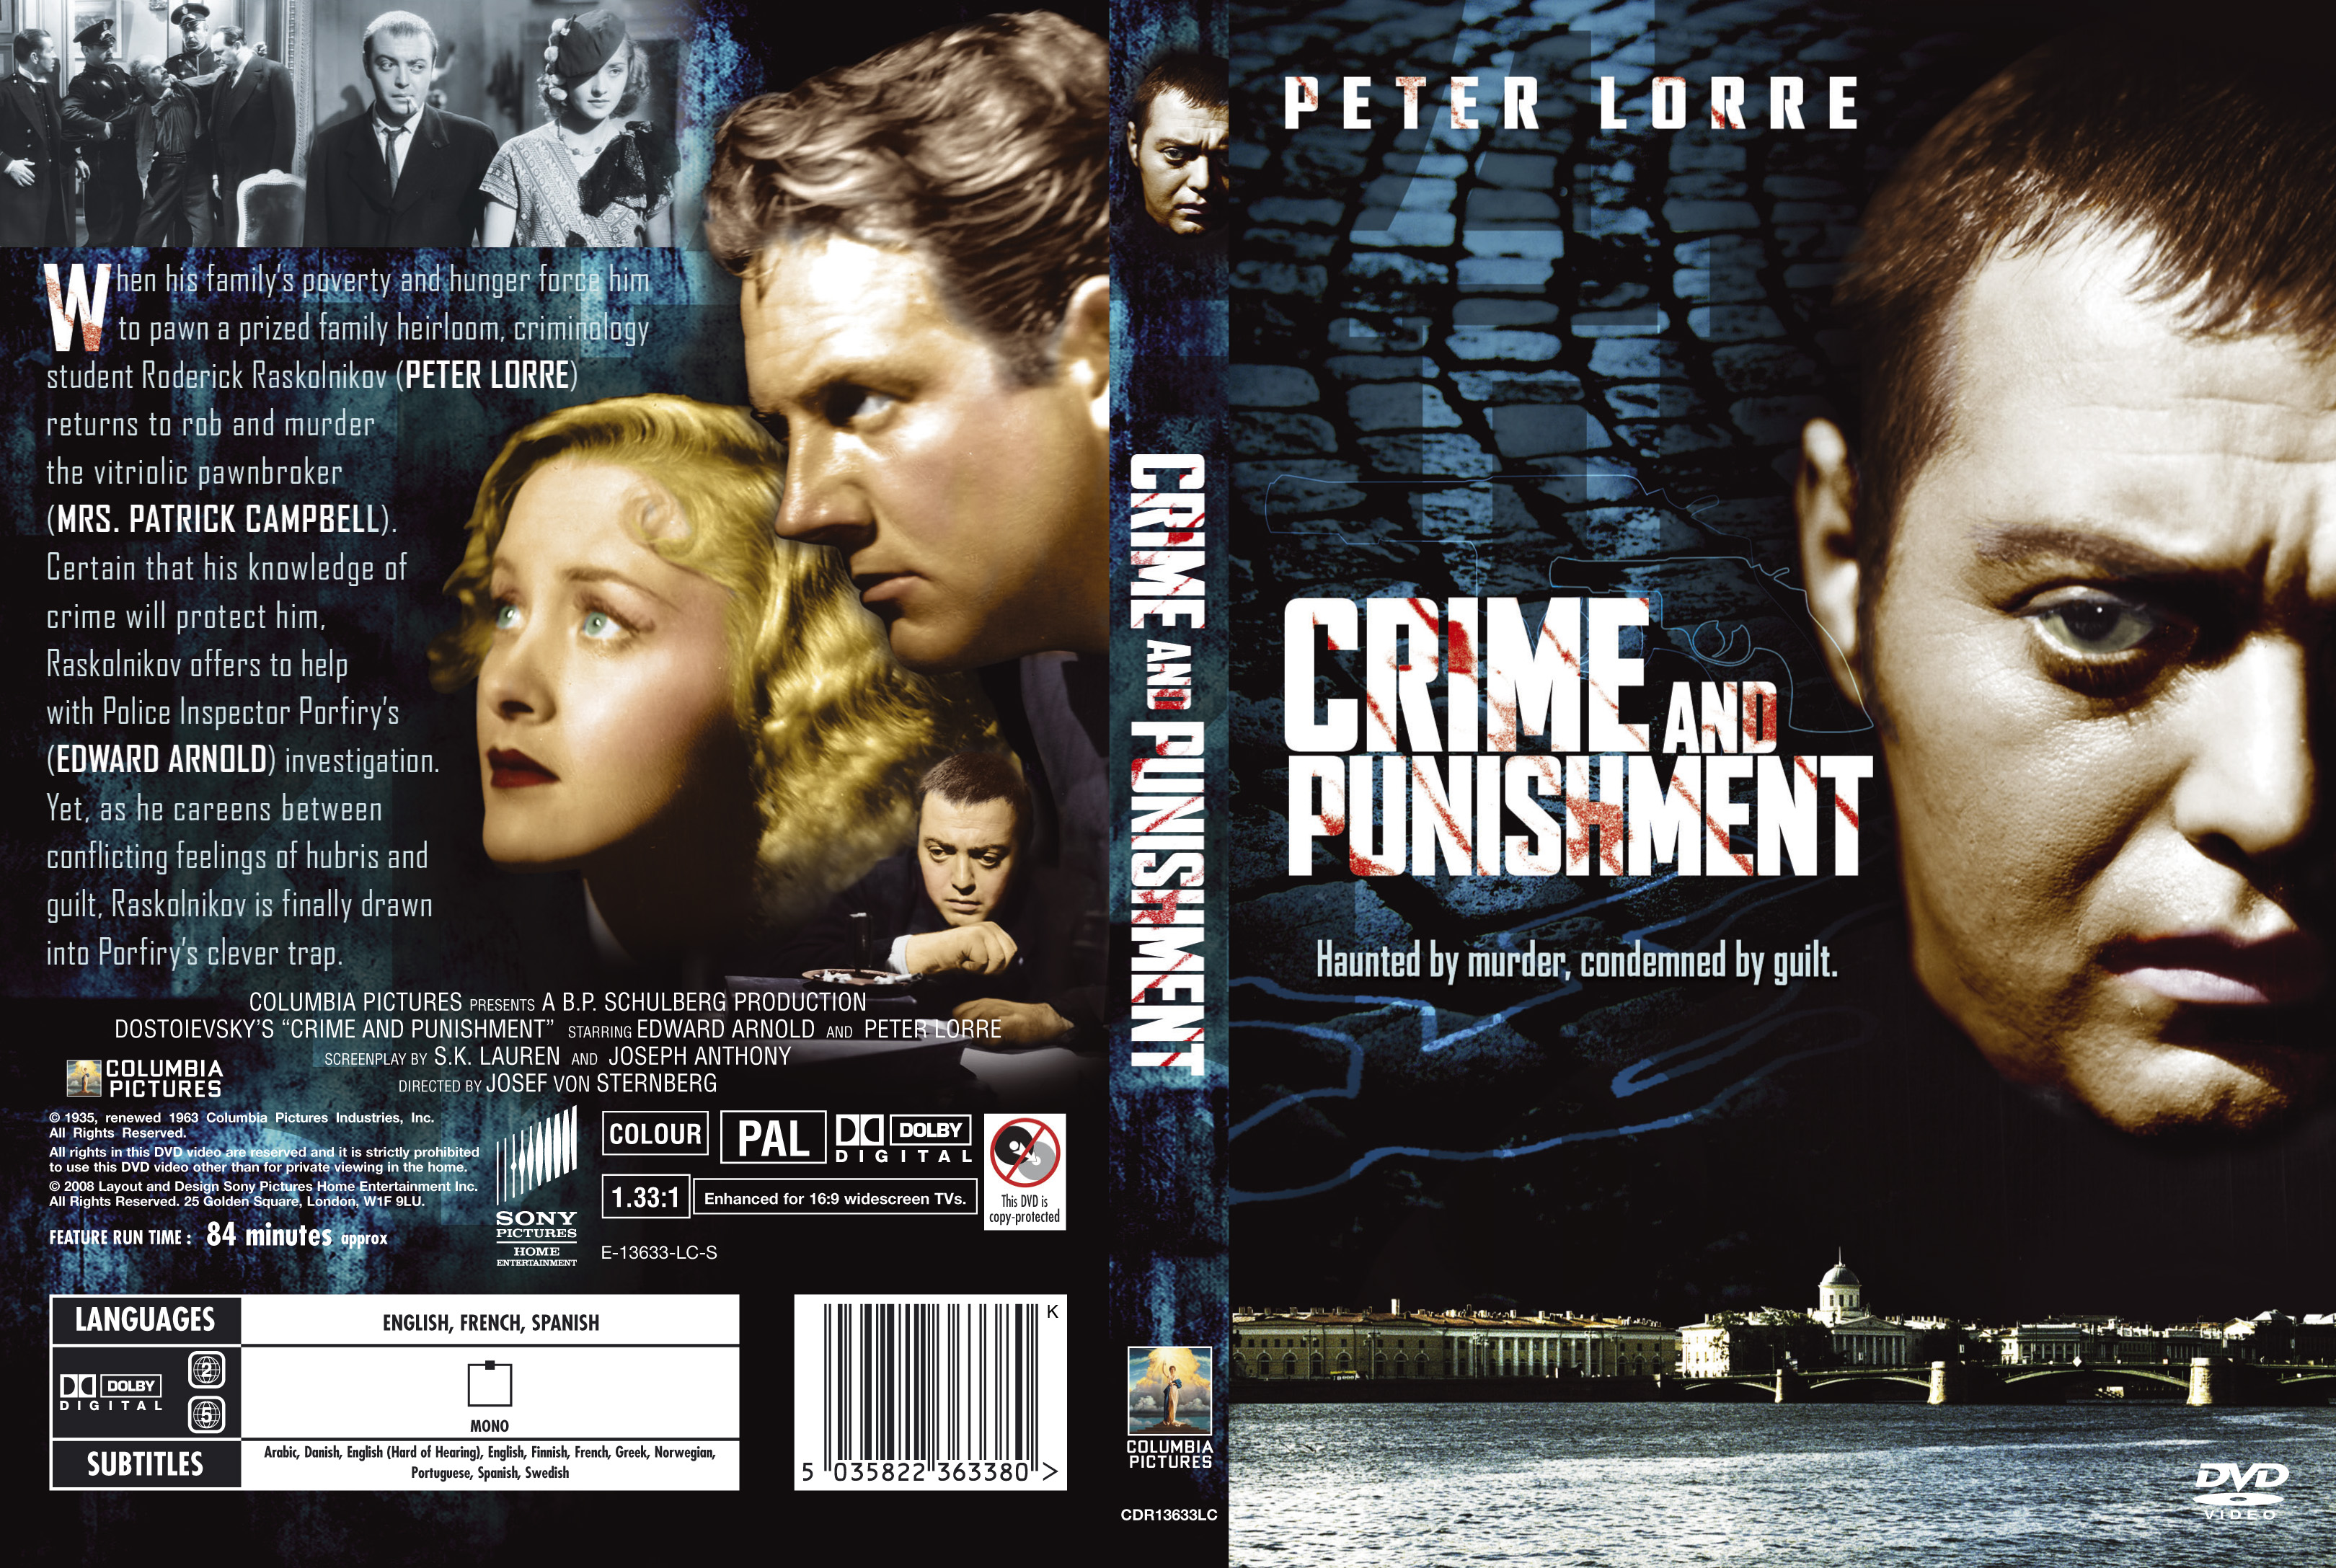 Crime And Punishment Dvd Covers Cover Century Over Album Art Covers For Free